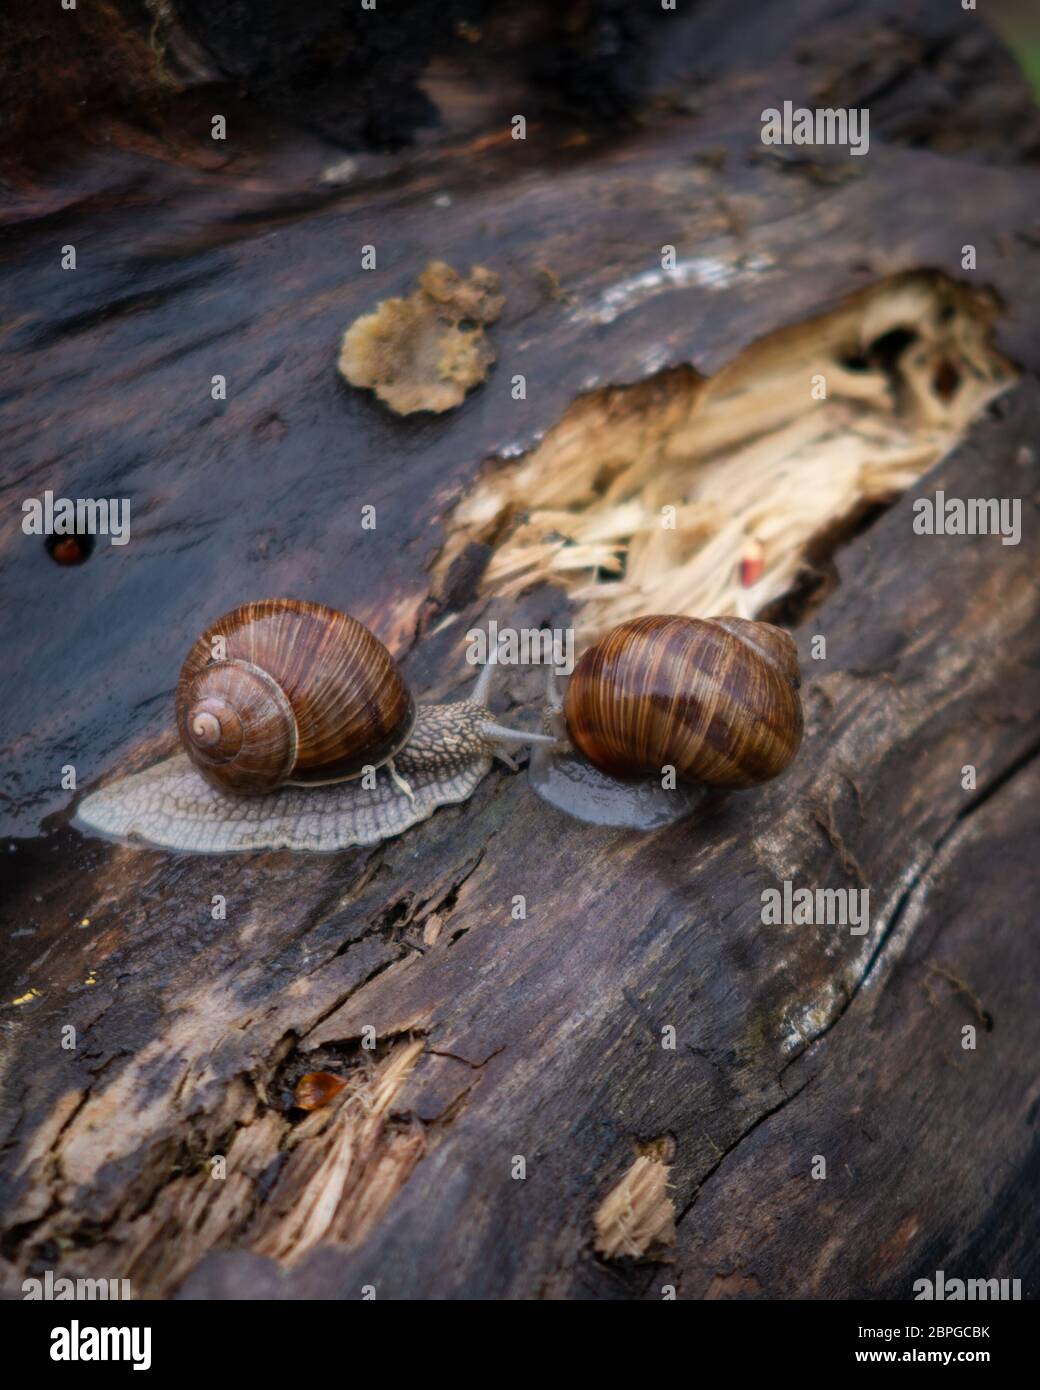 Two grape snails on an old brown stump after rain Stock Photo